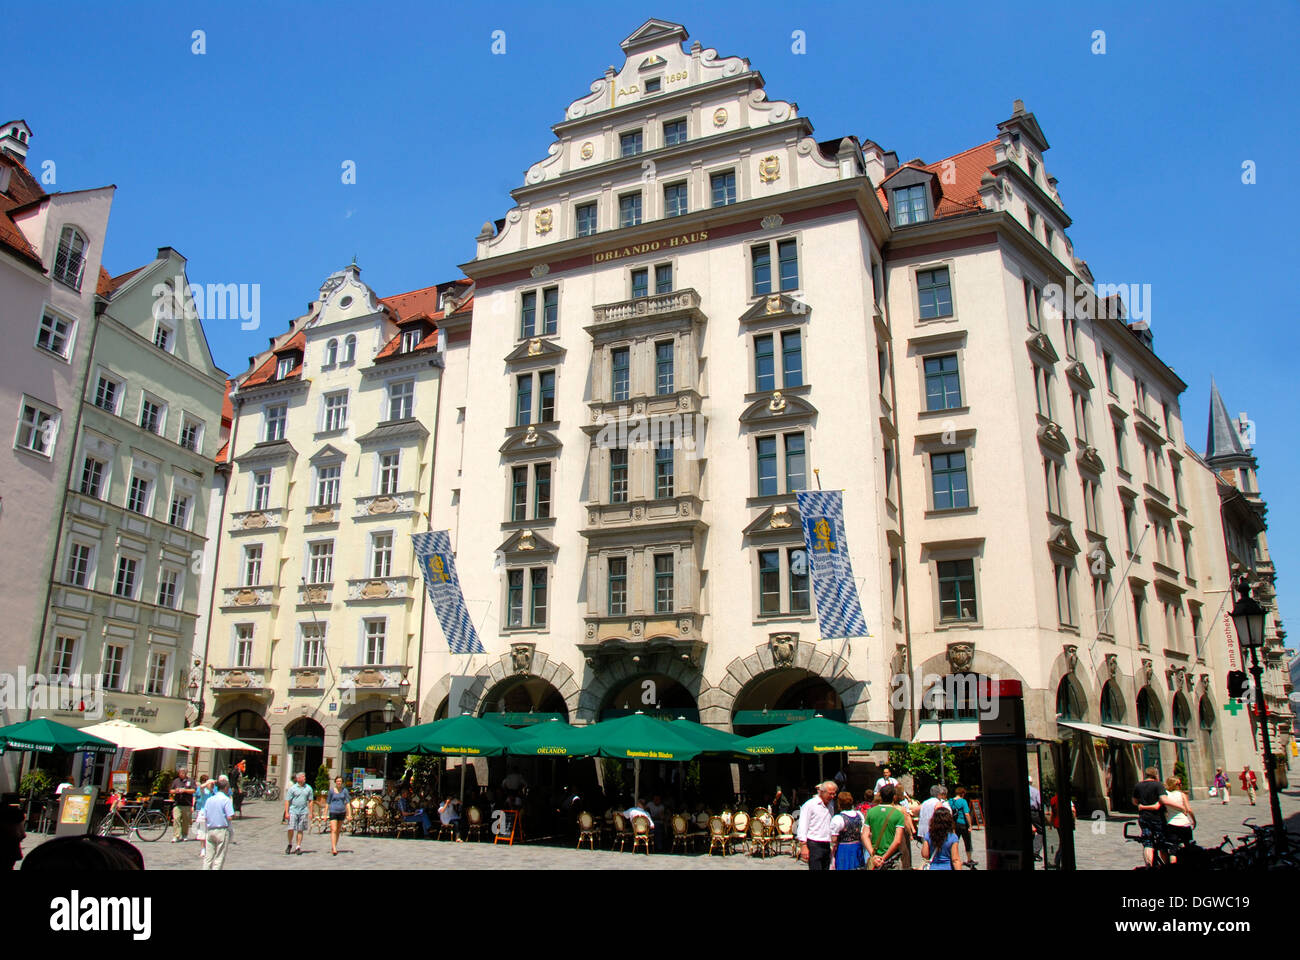 Orlando-Haus building on the Platzl, square with restaurant, downtown, old town, Munich, capital, Upper Bavaria, Bavaria Stock Photo